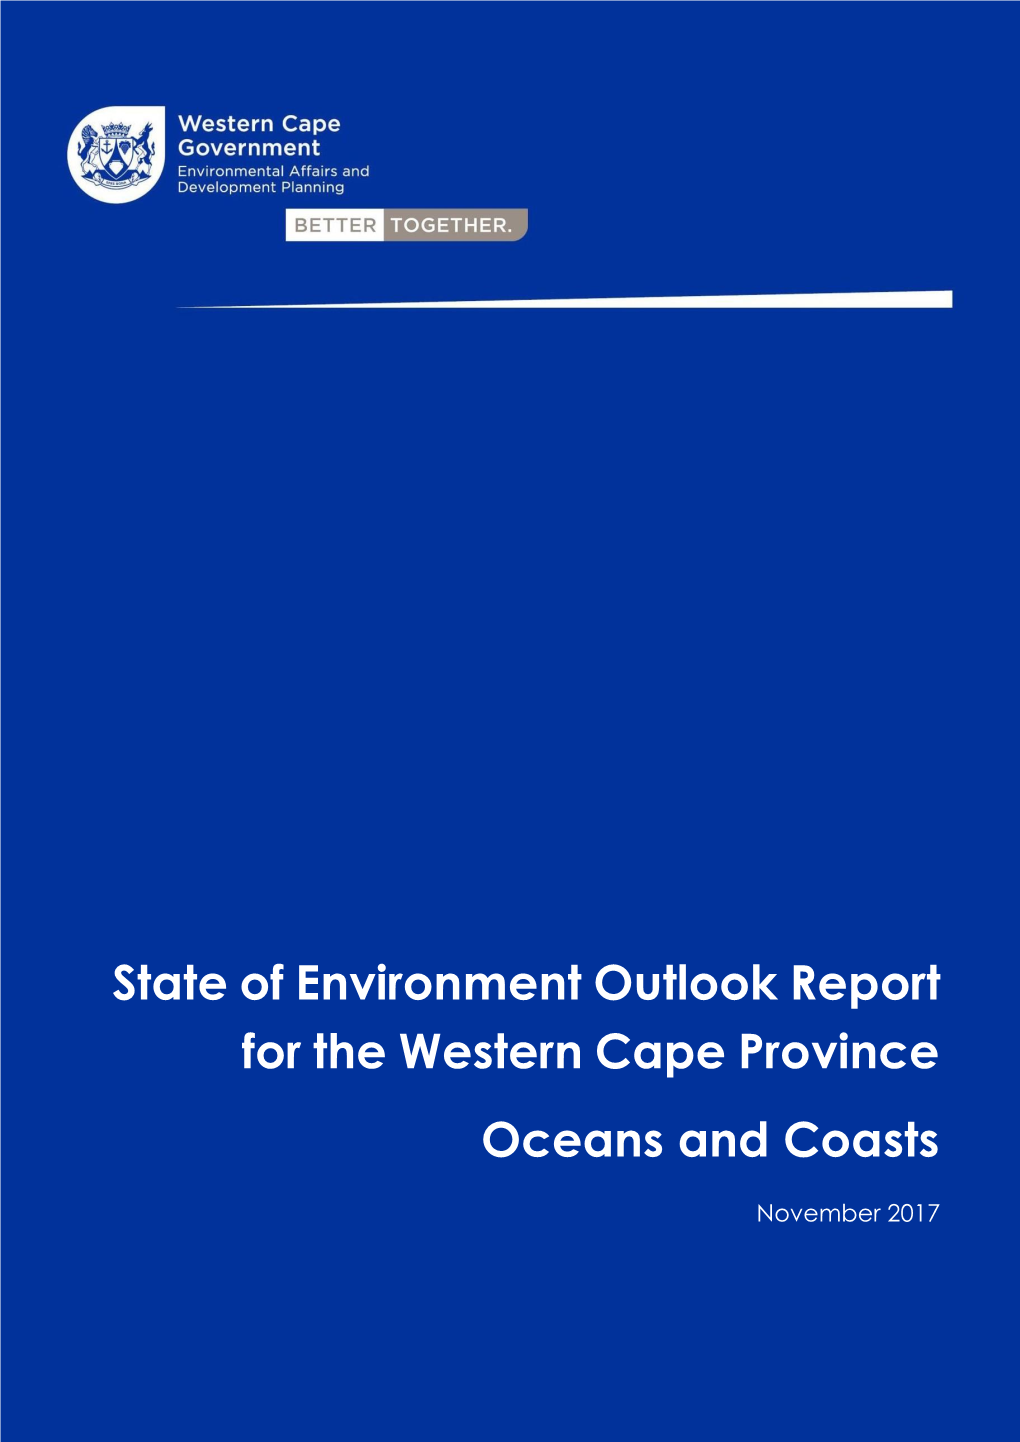 State of Environment Outlook Report for the Western Cape Province